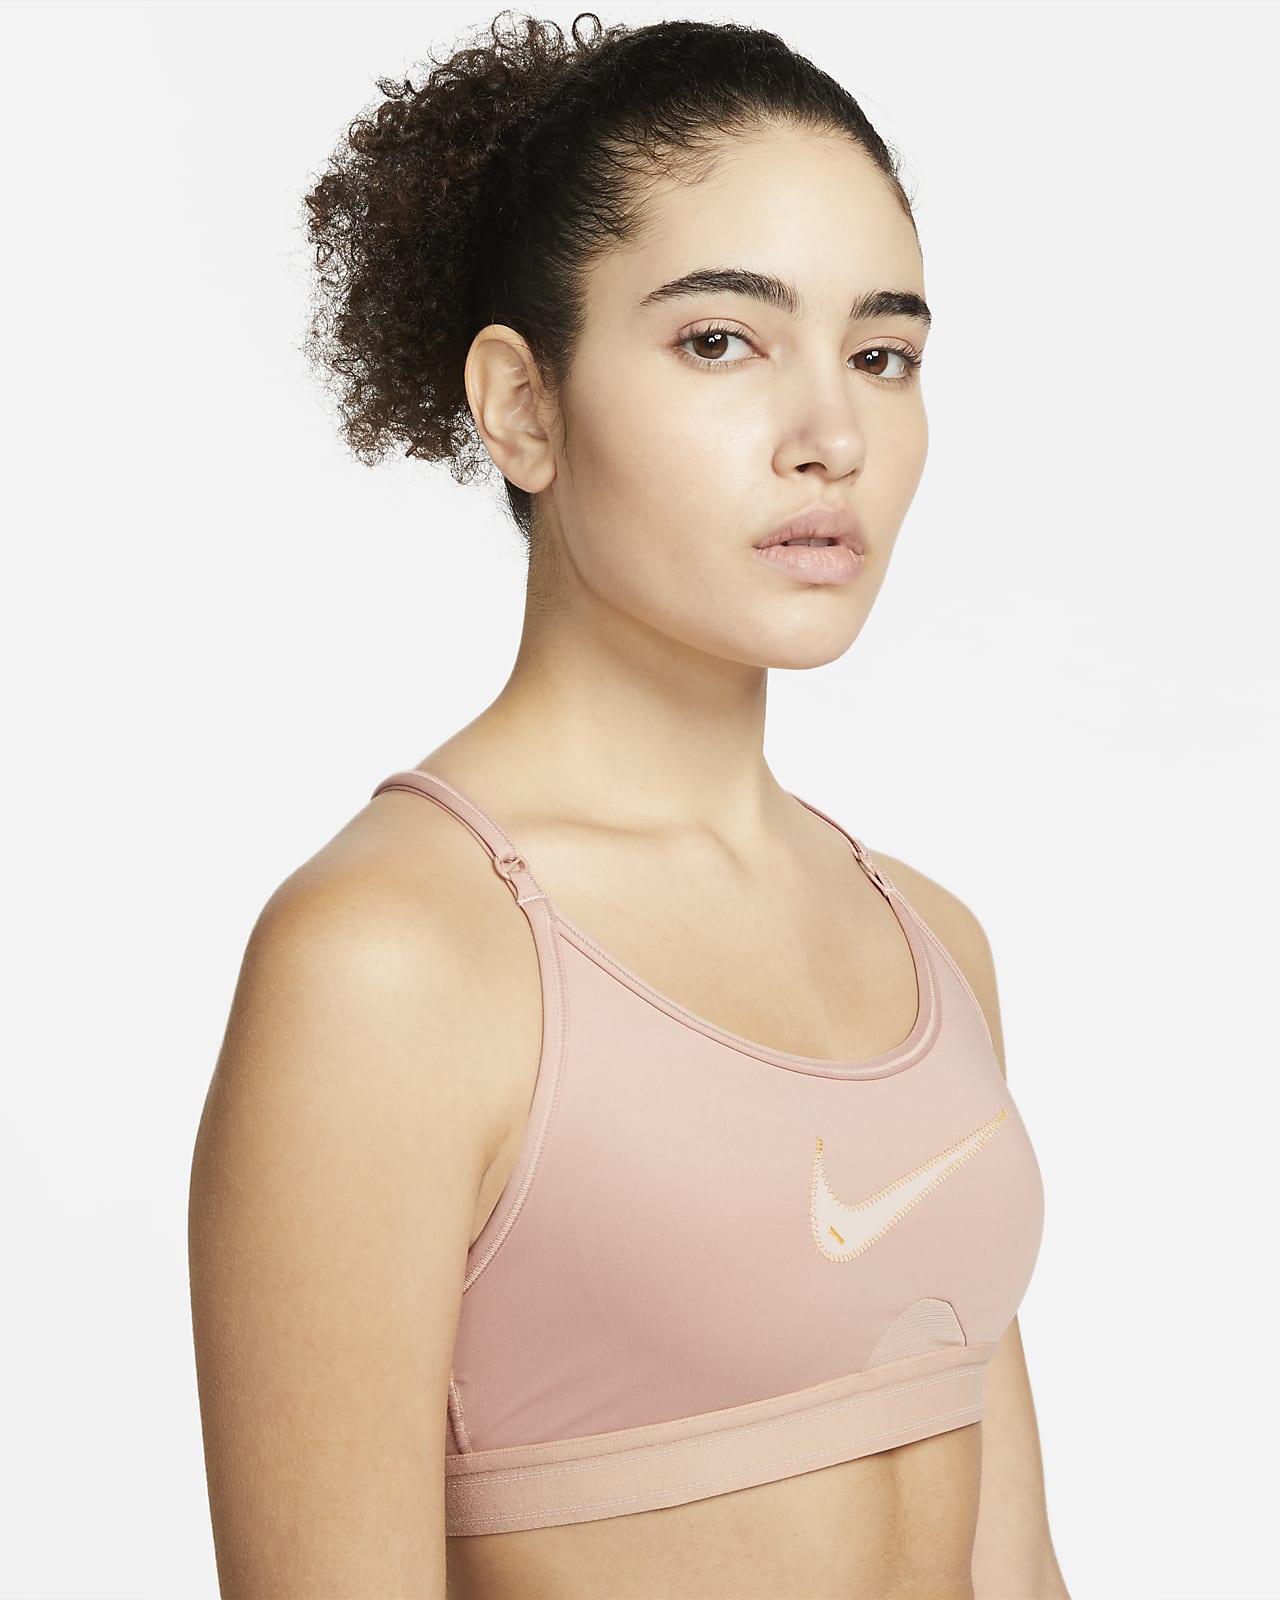 Nike Women's Indy Luxe Light Support Sports Training Bra Pink